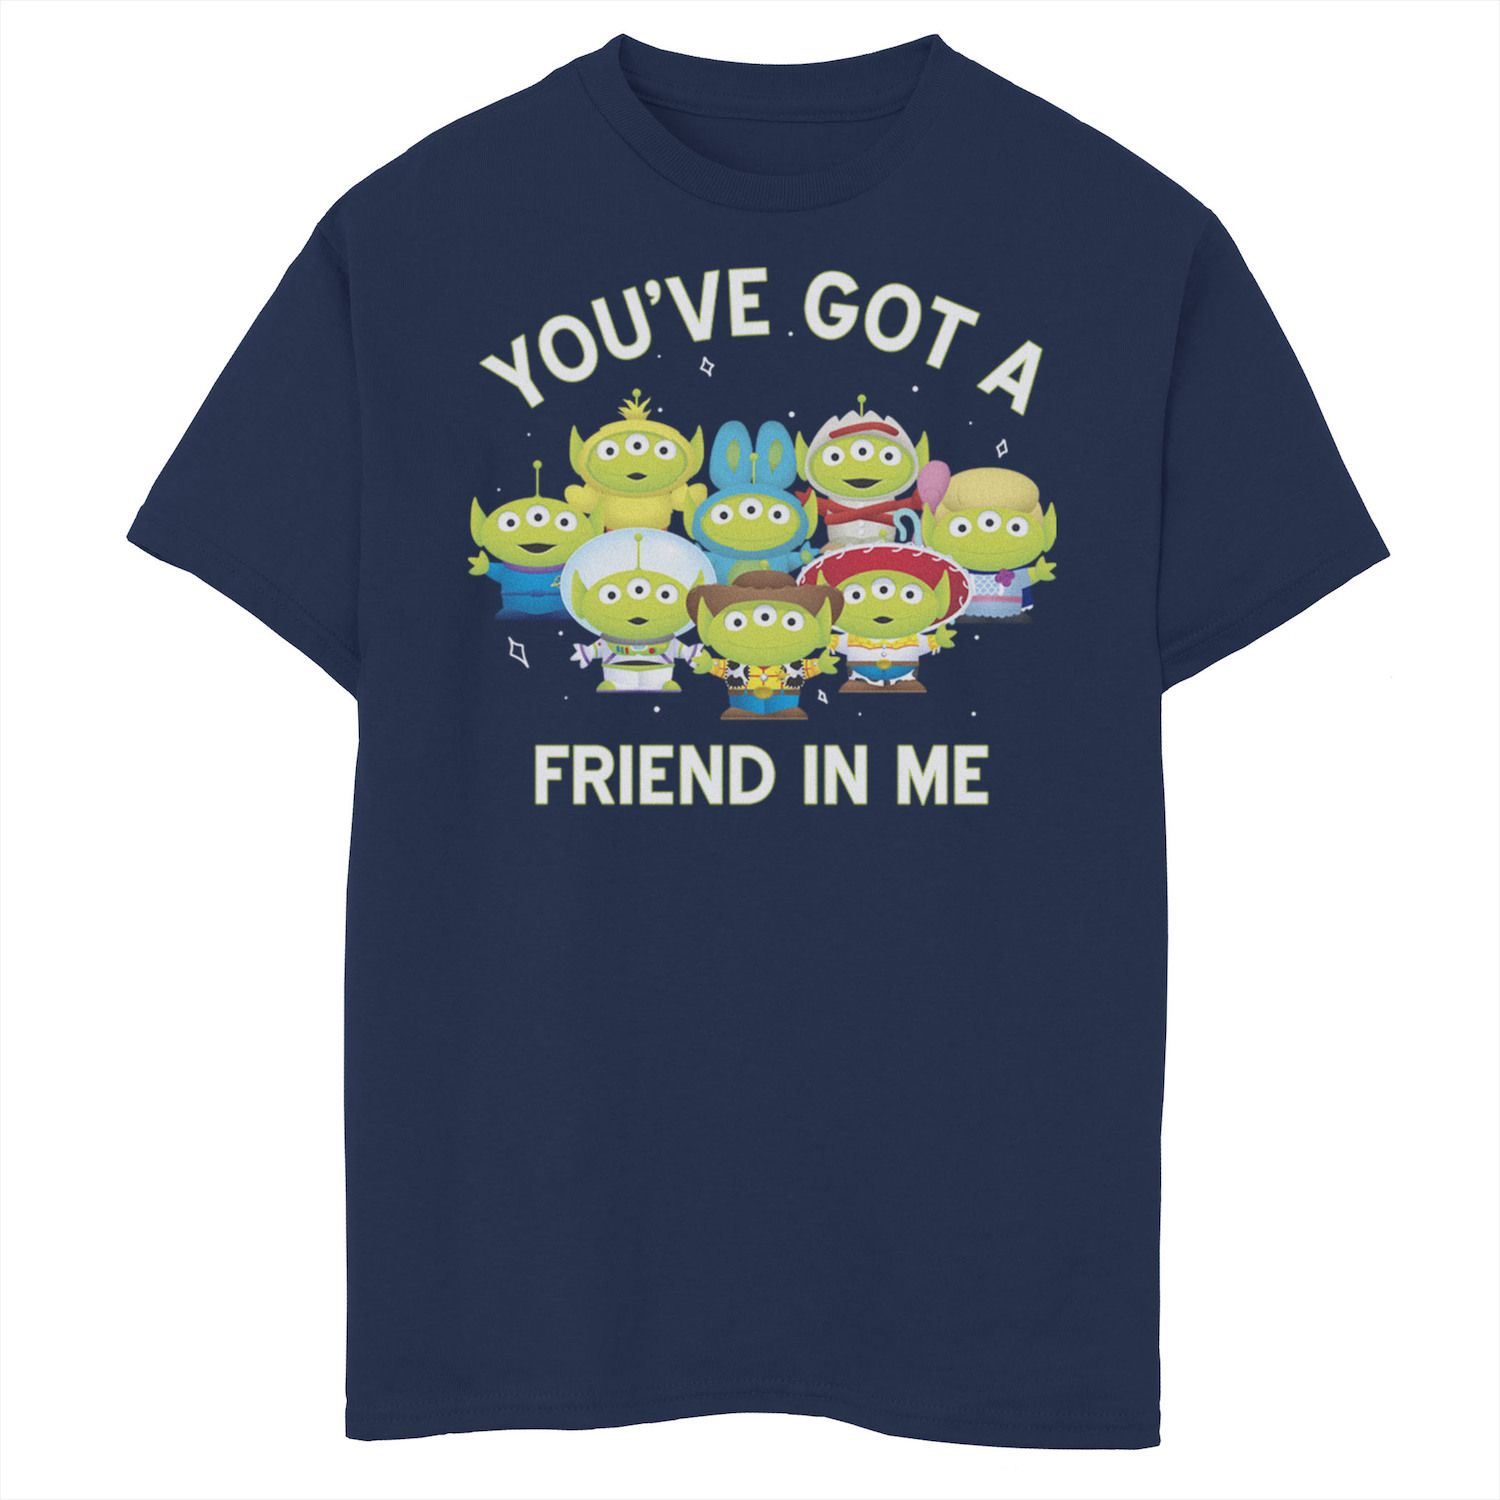 Image for Disney / Pixar 's Boys 8-20 Toy Story You've Got A Friend In Me Graphic Tee at Kohl's.